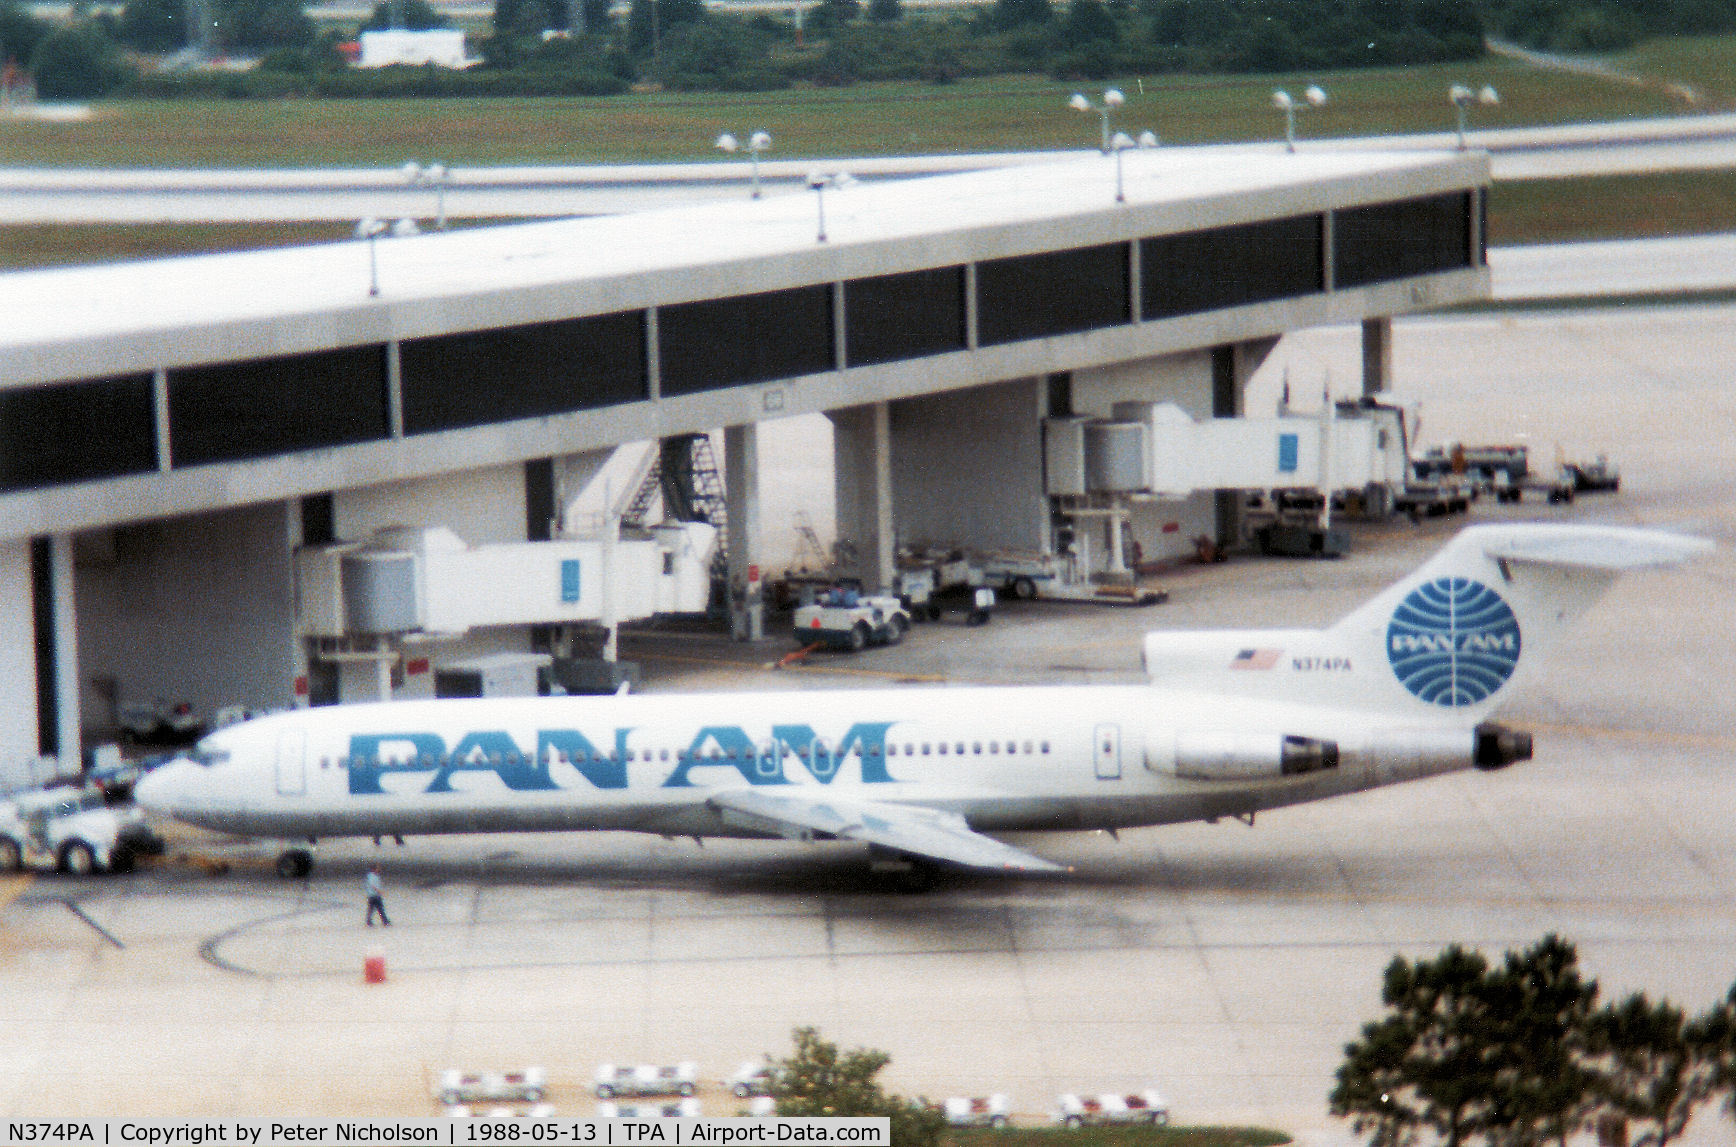 N374PA, 1973 Boeing 727-214 C/N 20679, Boeing 727-214 Clipper Flying Arrow of Pan Am at the terminal at Tampa in May 1988.